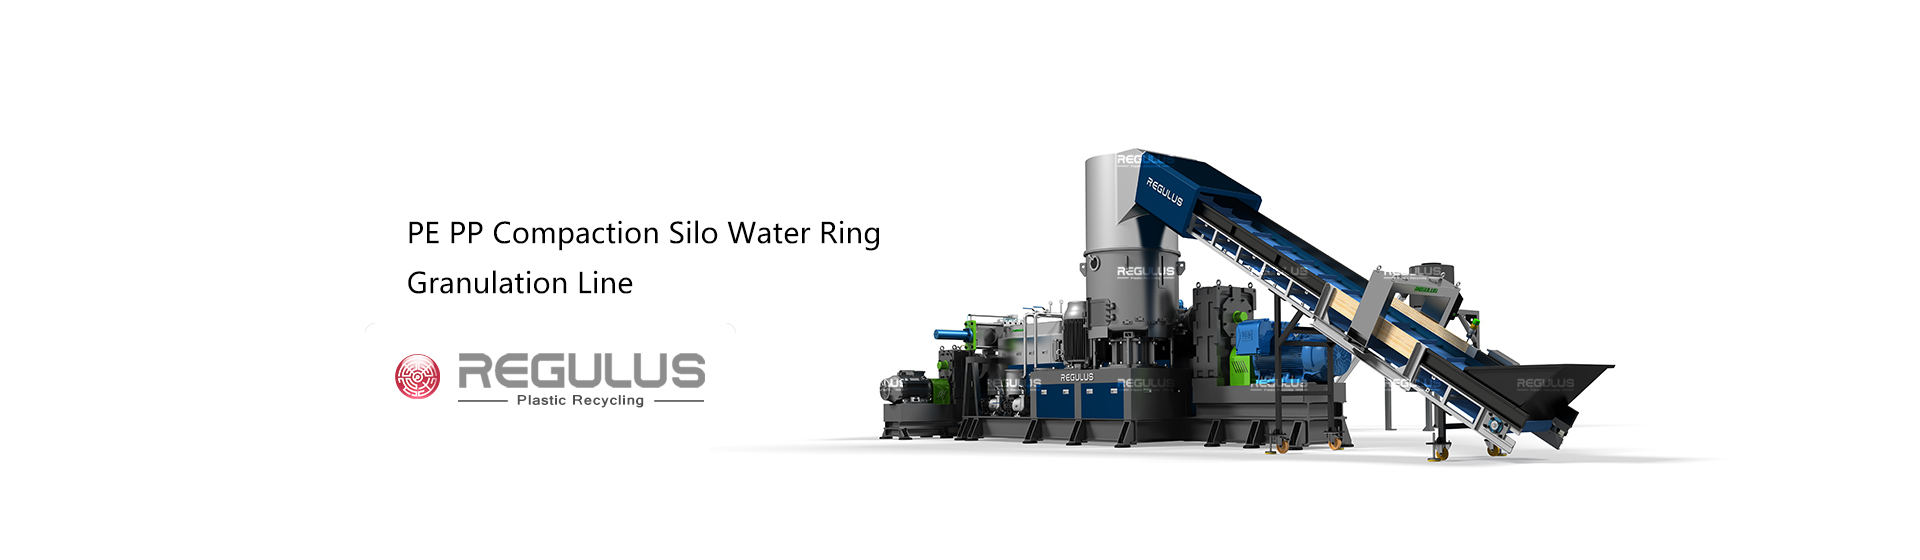 Revolutionize Plastic Recycling with the Power of Plastic Agglomerator Machine!